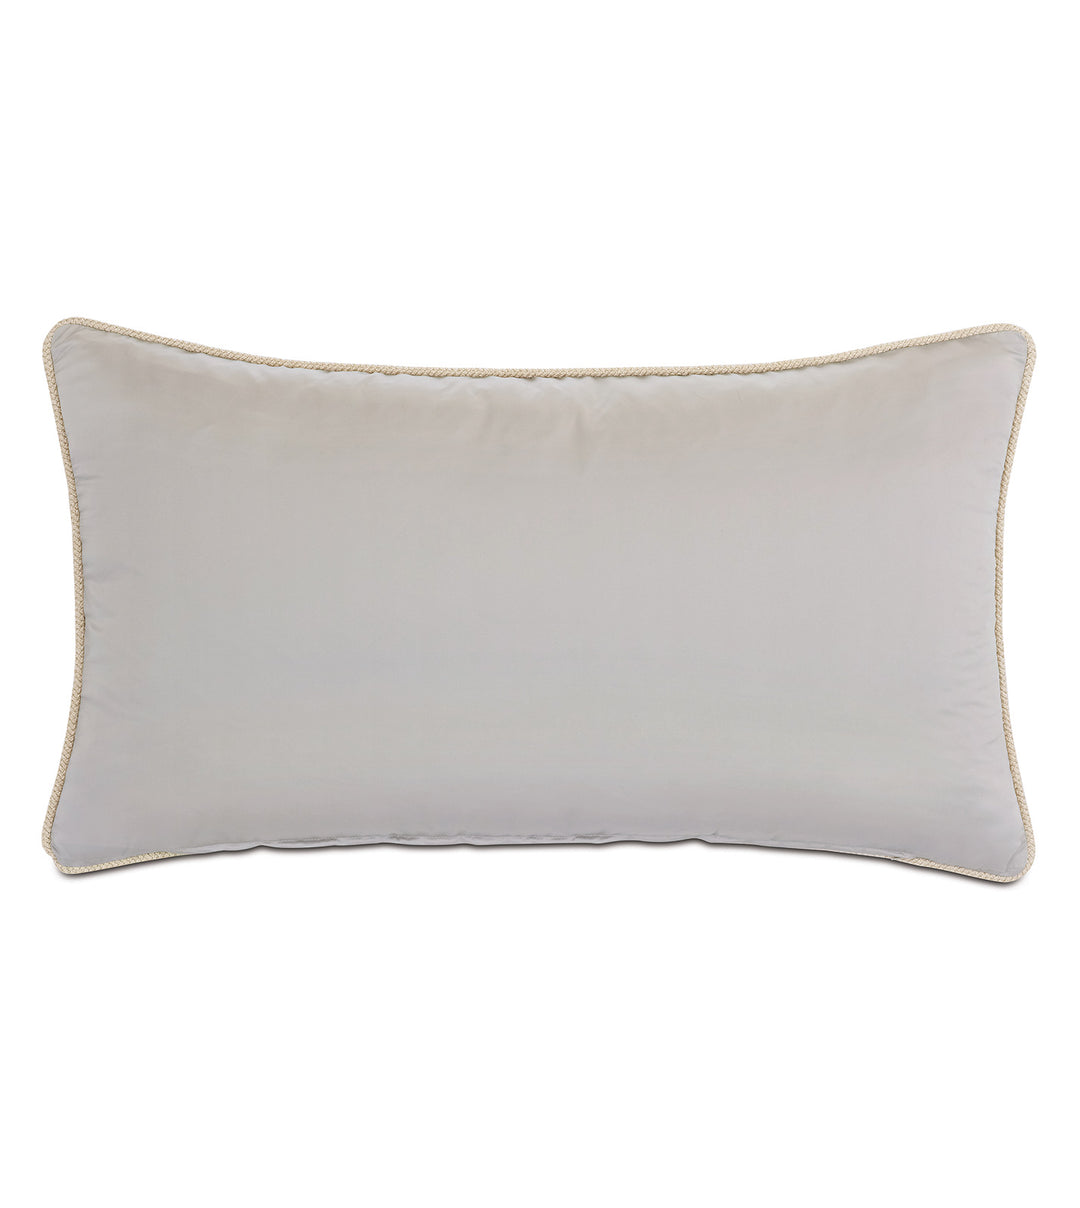 Eastern Accents Jolene Damask Pillow Sham Sham By Eastern Accents